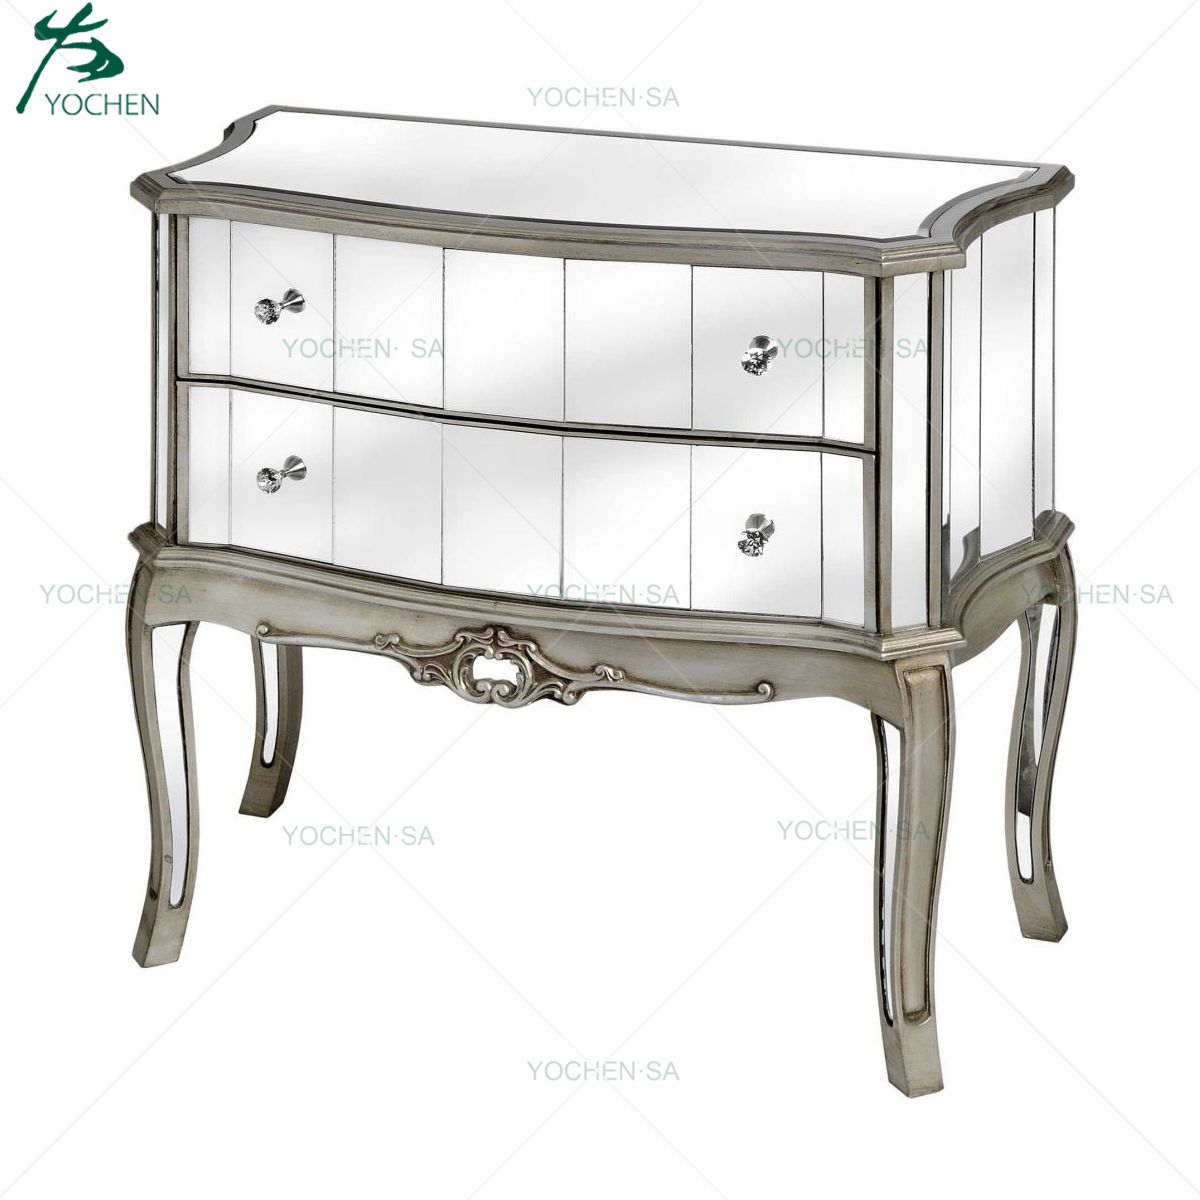 Champagne Silver Mirrored Glass Chest of 2 Drawer Living Room Cabinet